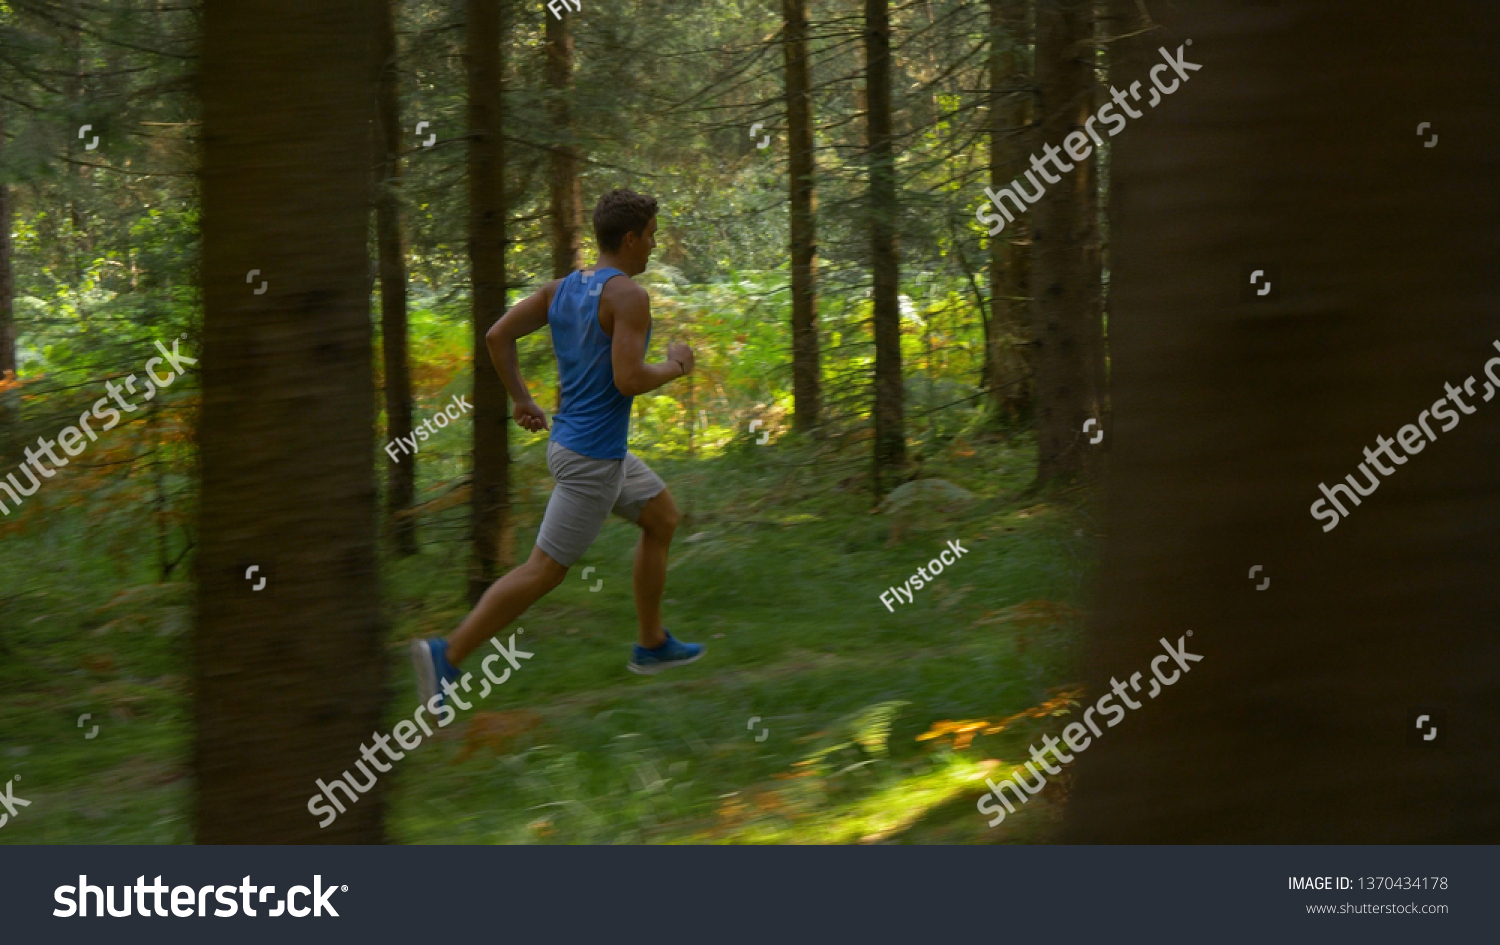 Athletic sportsman goes for a long relaxing jog along an empty forest trail on an idyllic summer day. Sporty Caucasian male exploring the tranquil wilderness by jogging through the coniferous forest. #1370434178